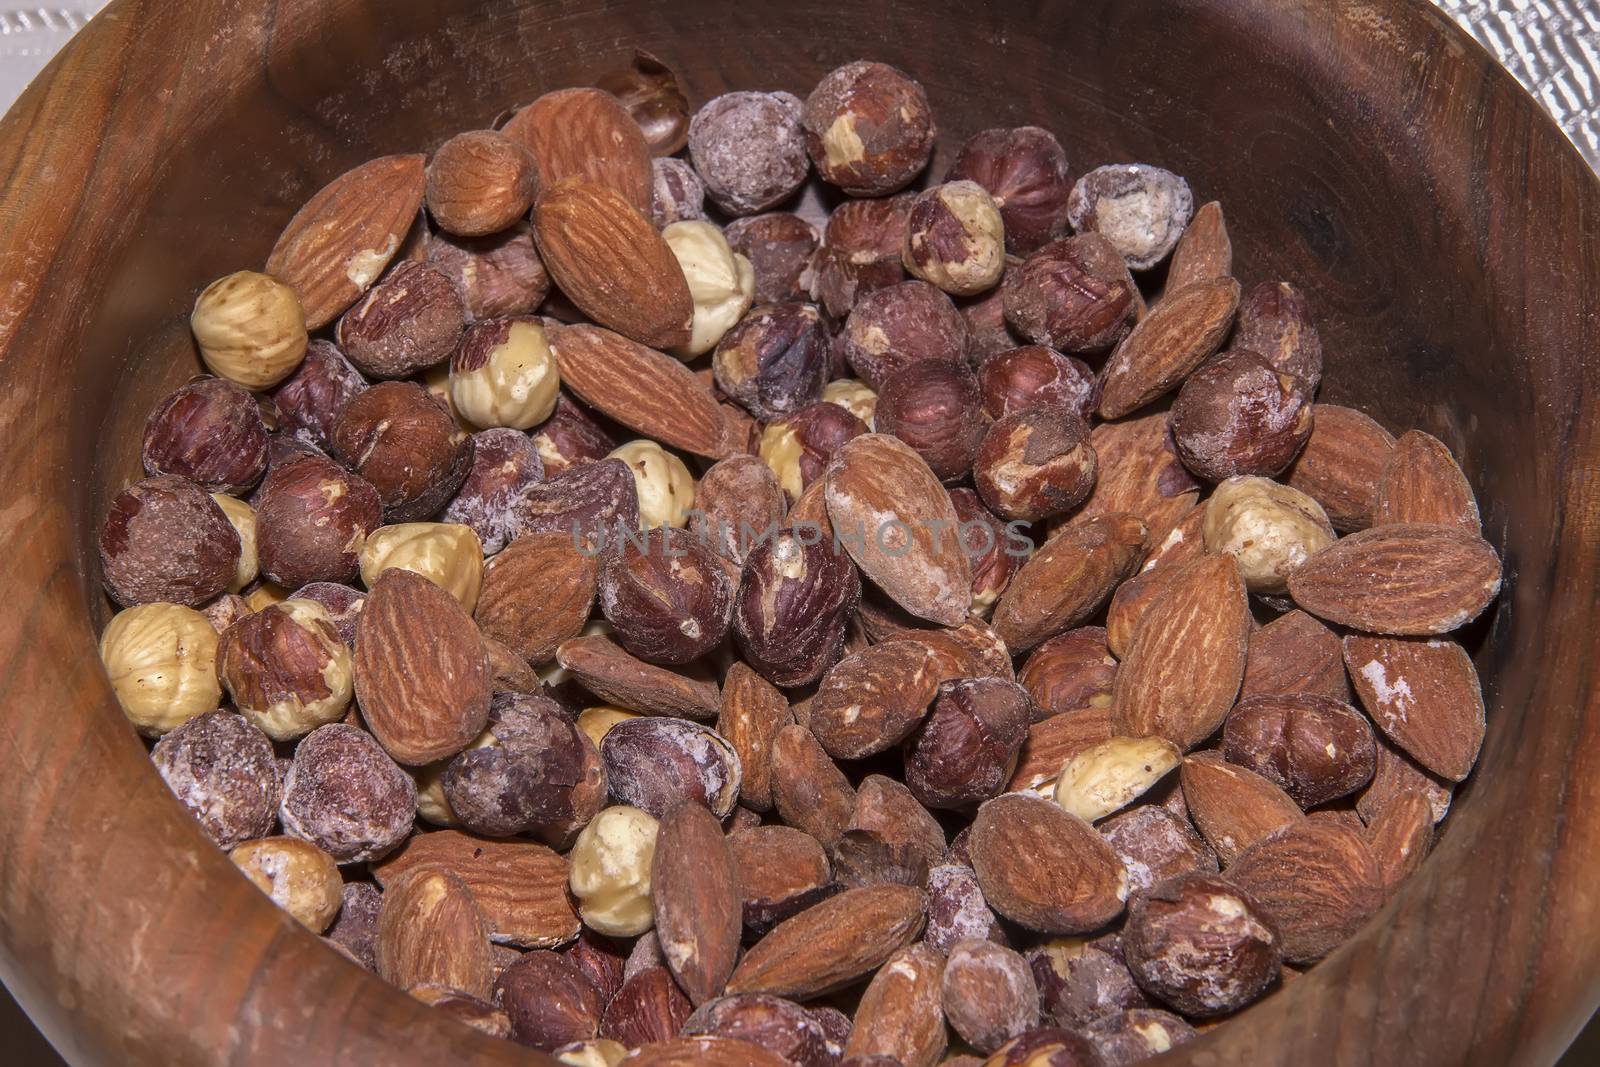 Lots of roasted almonds, hazelnuts in wooden bowl. Close